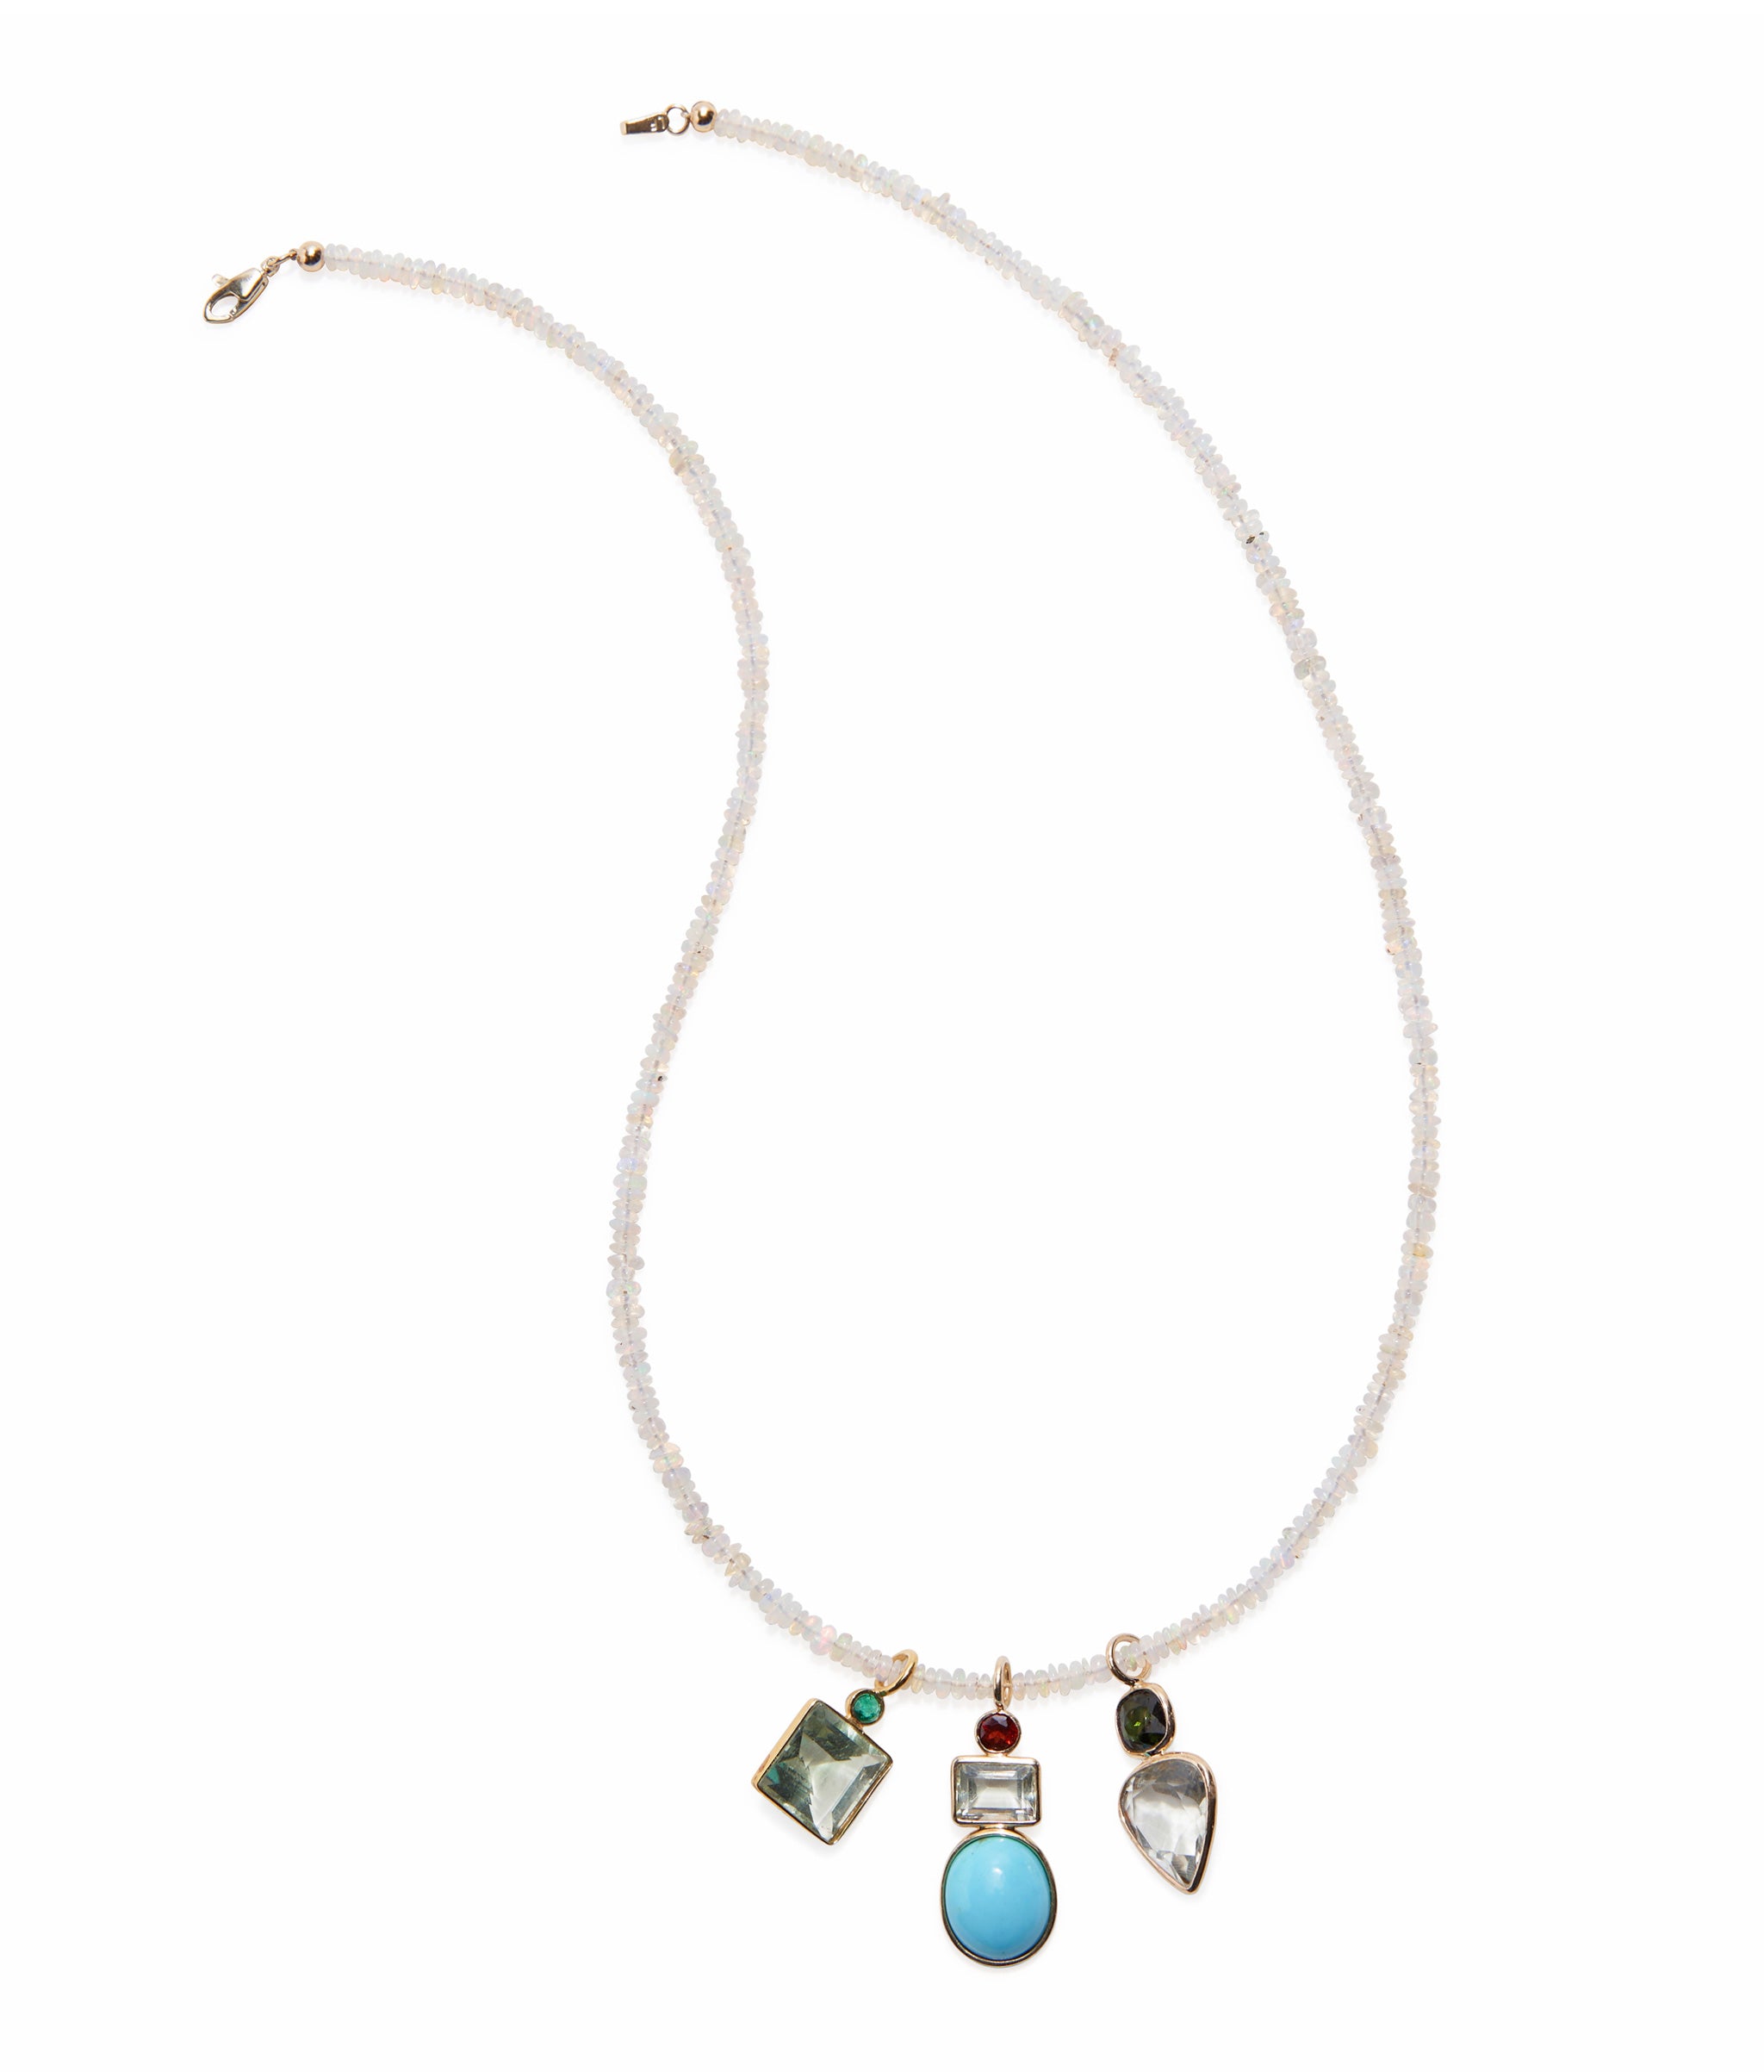 Tiny Beaded 14k Gold and Herkimer Diamond Quartz Necklace with three colorful semiprecious charms